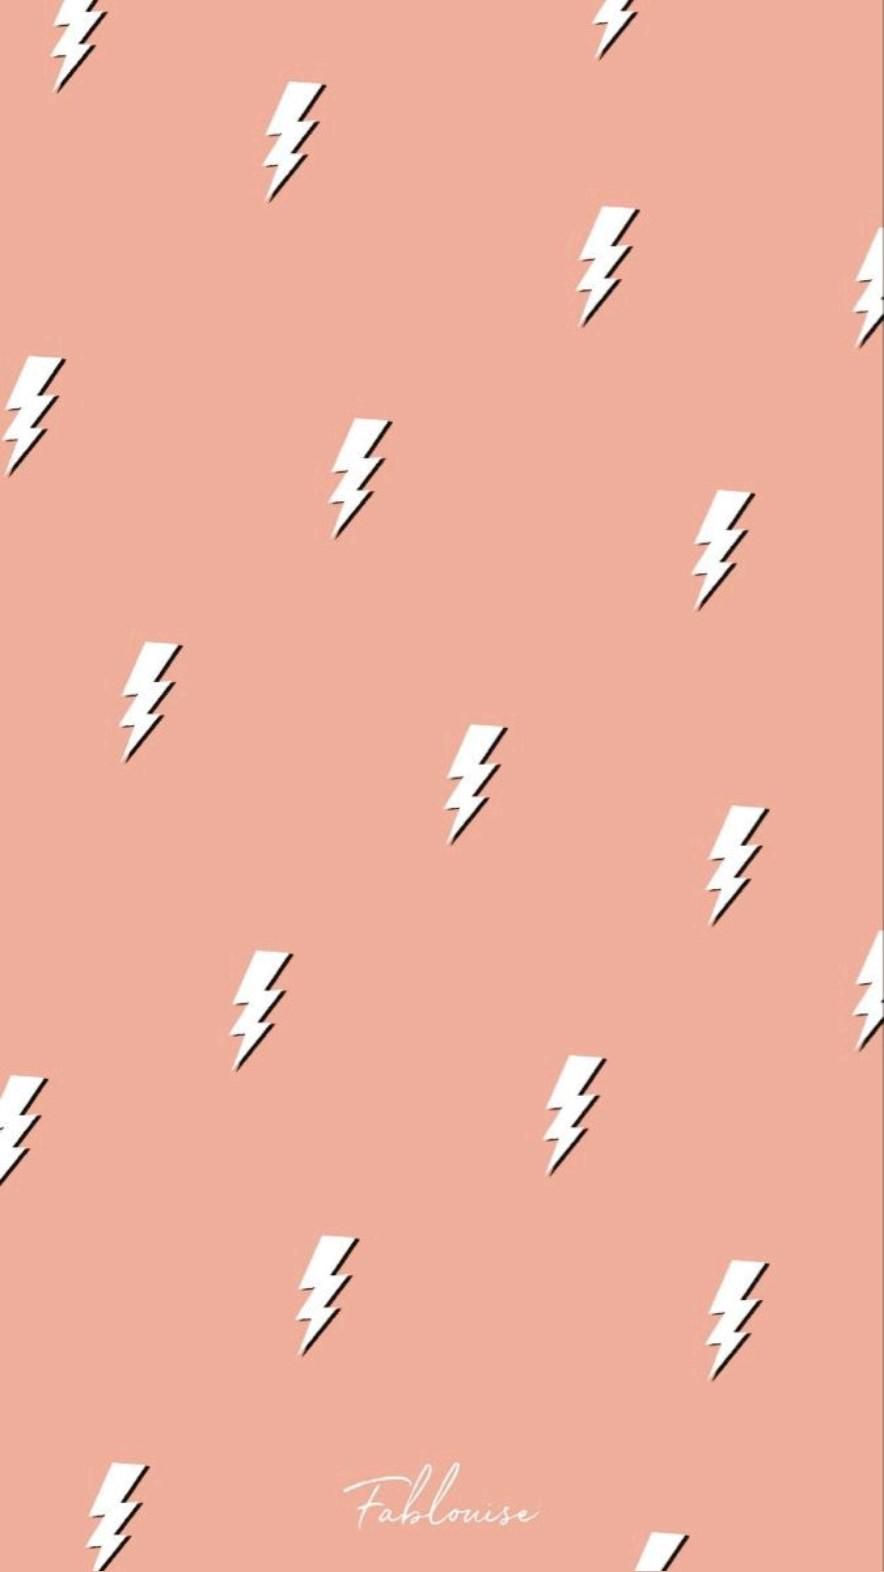 Freebies: 70 Really Cute Preppy Aesthetic Wallpapers For Your Phone!   Preppy aesthetic wallpaper, Pretty wallpapers, Iphone wallpaper images